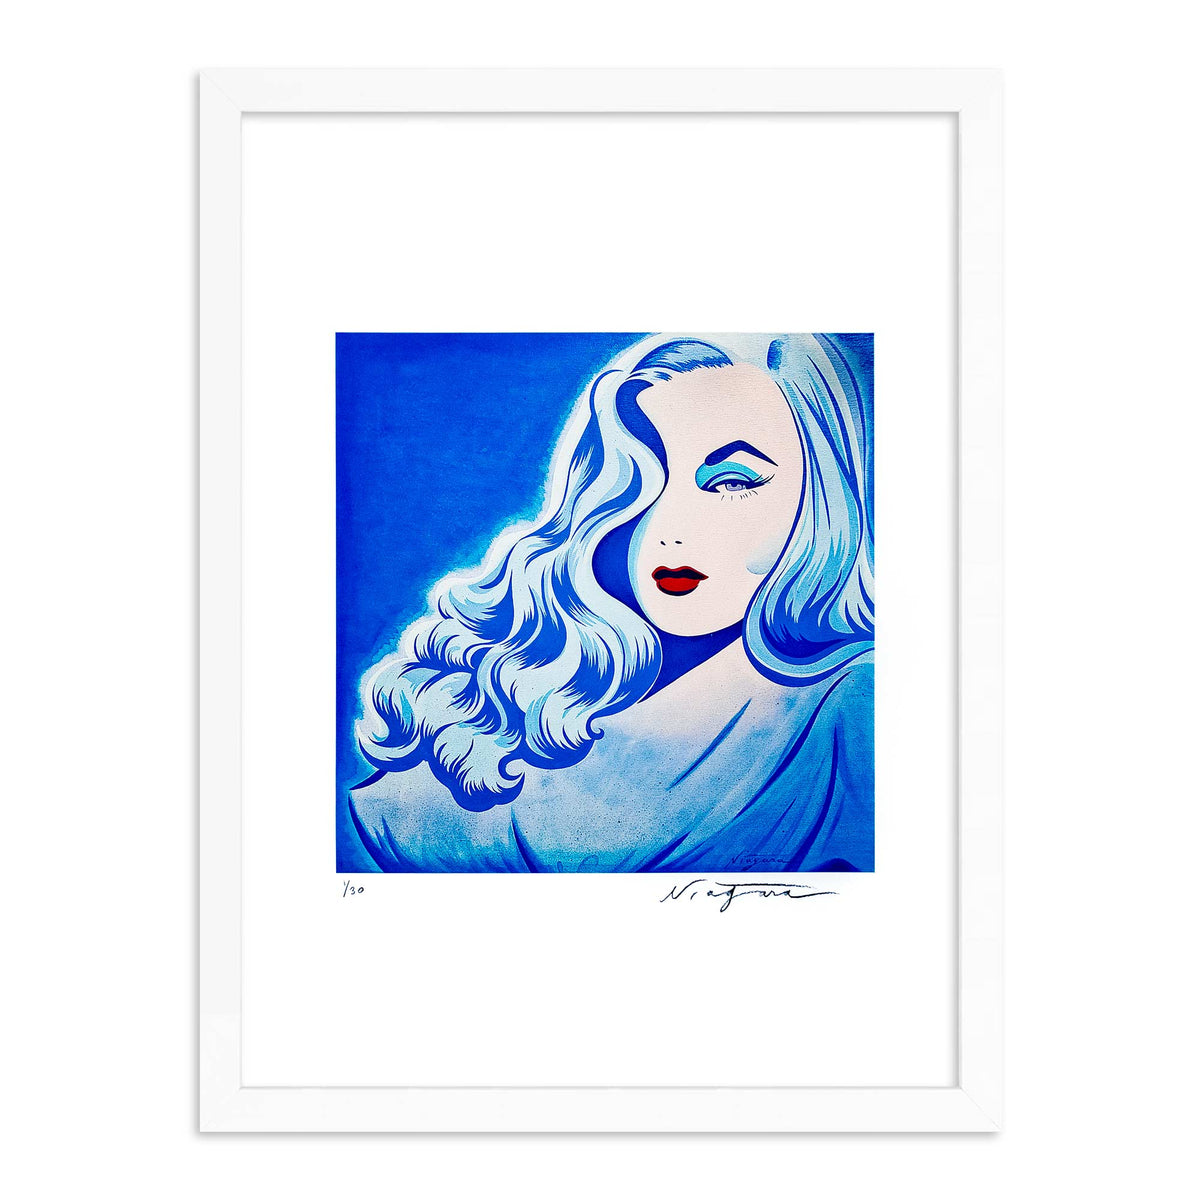 veronica lake - numbered edition, #1